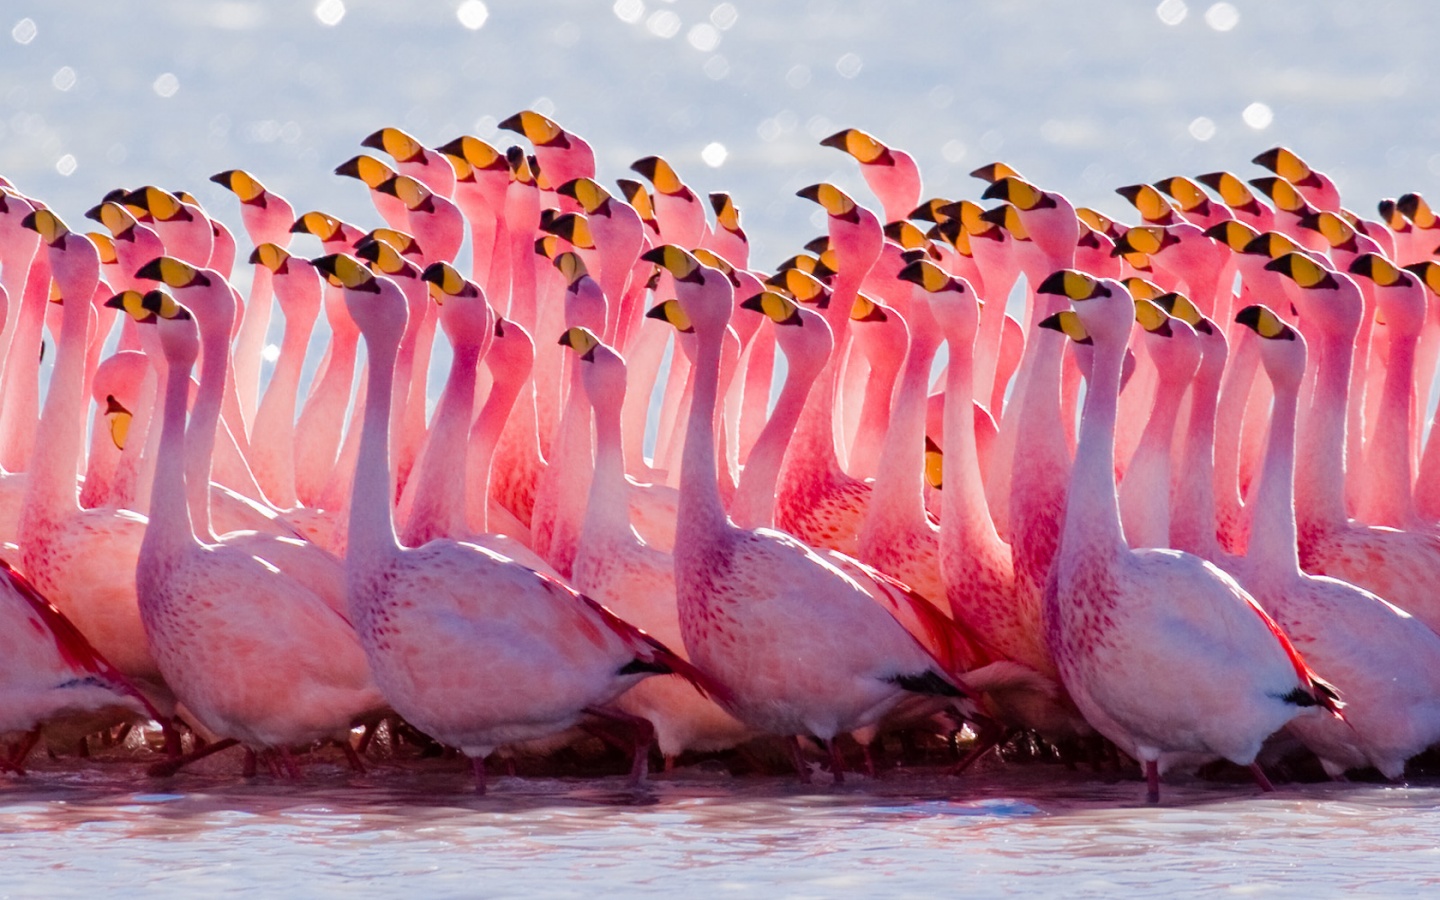 Flamingo wallpapers for desktop download free Flamingo pictures and  backgrounds for PC  moborg